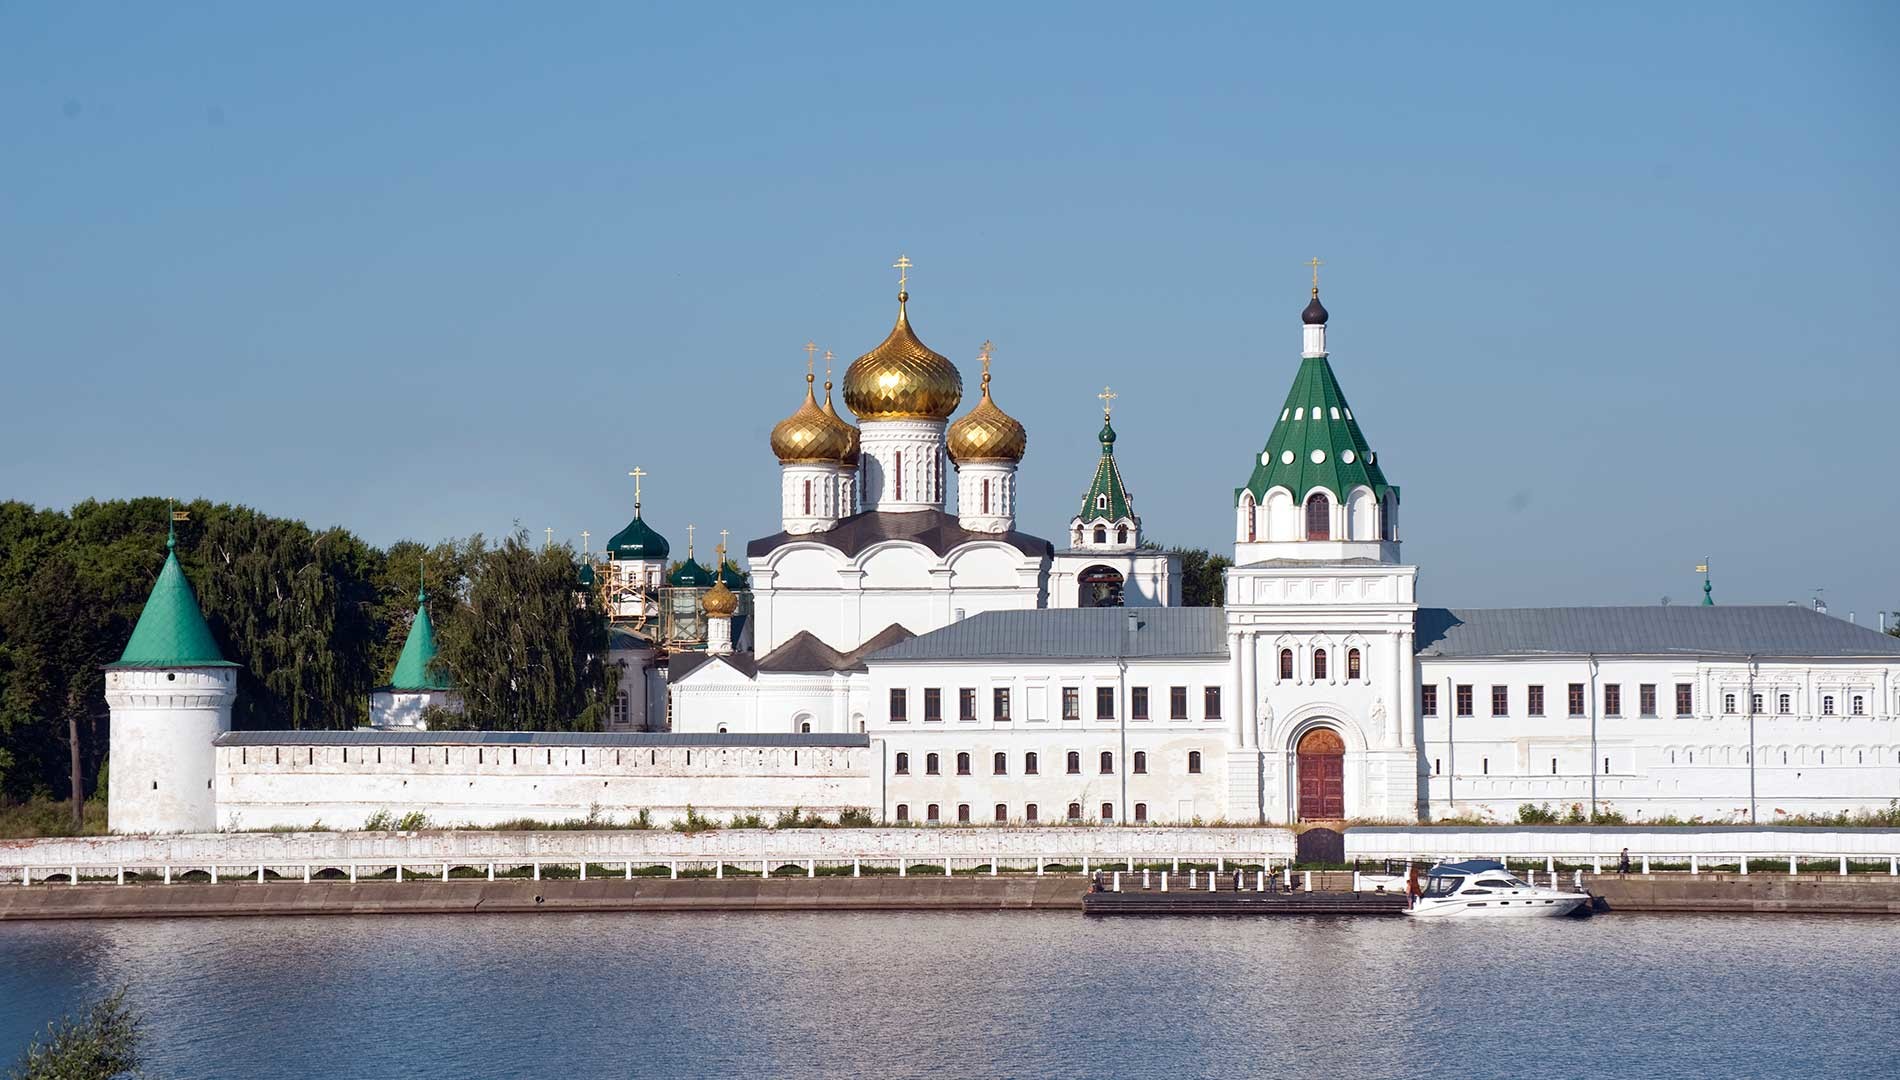 Trinity-Ipatiev Monastery, east view across Kostroma River. From left: Water Tower; Cathedral of Nativity of the Virgin; Trinity Cathedral; bell tower; Archbishop's Cloisters with Gate Church of Sts. Chrysanthus & Daria. Aug. 13, 2017.